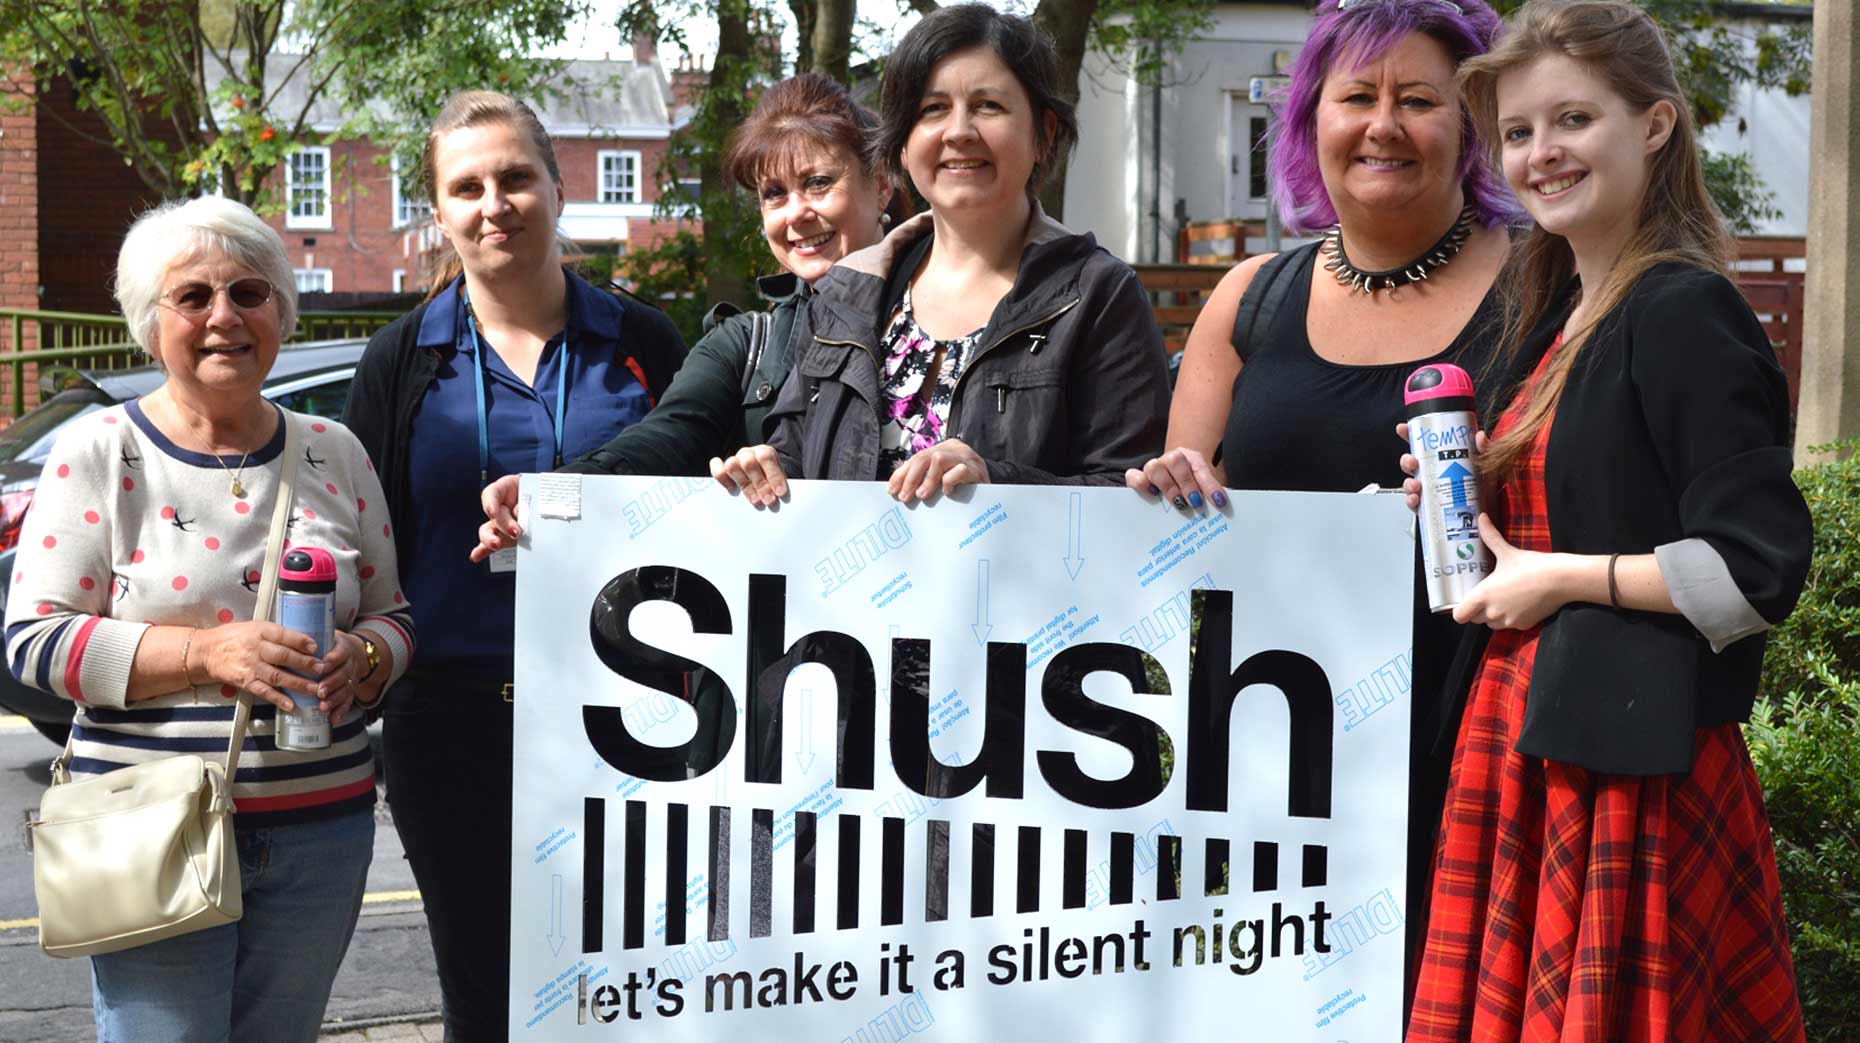 The annual Shush campaign has been launched again in Lincoln.